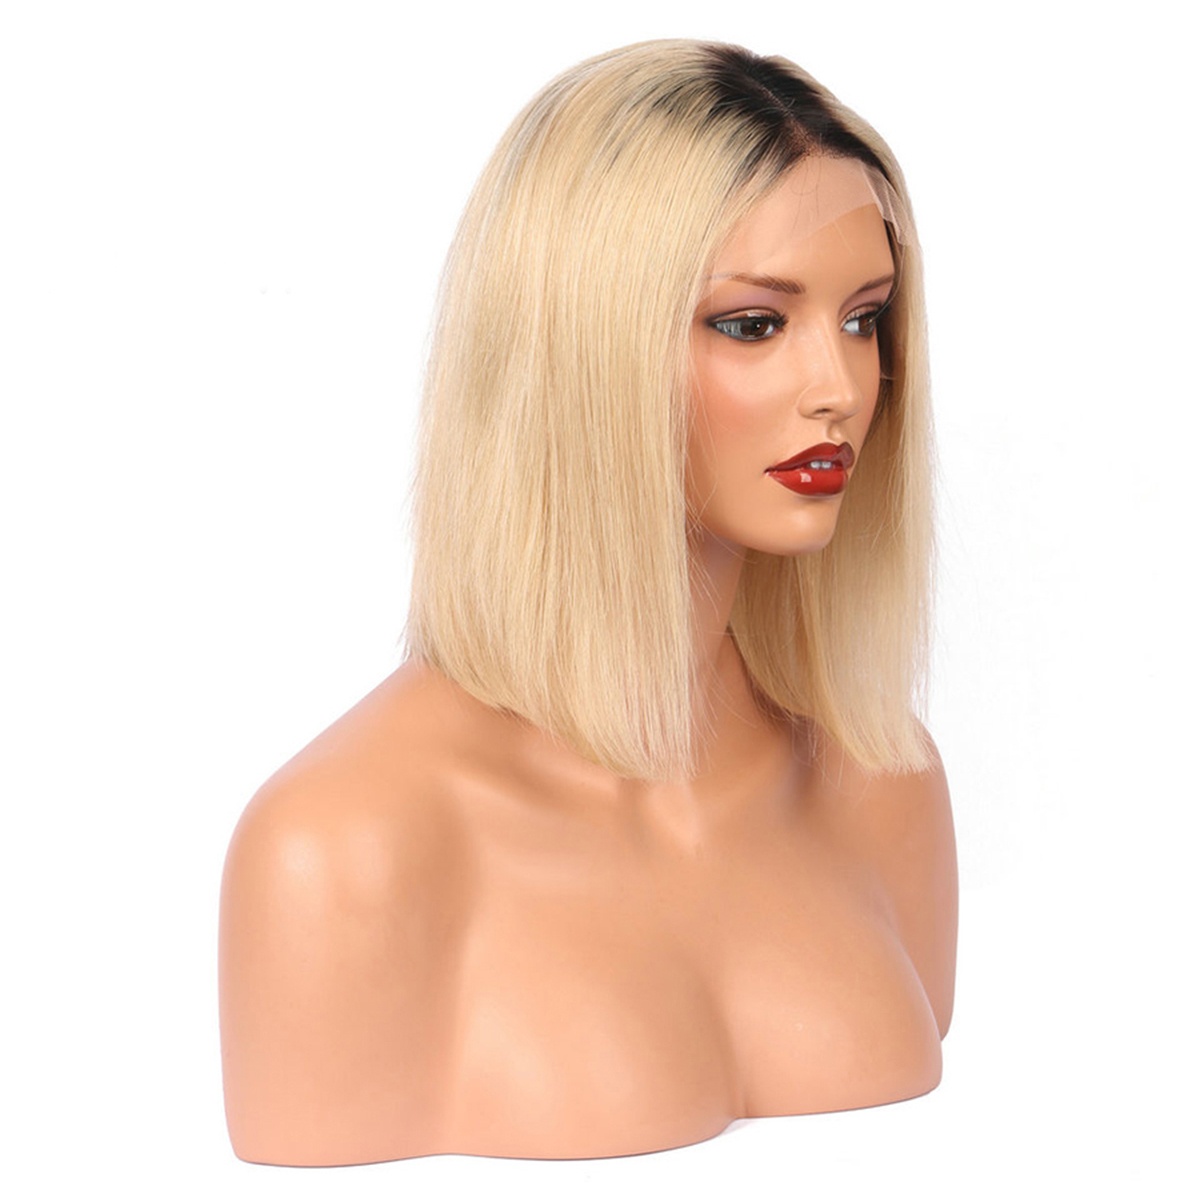 Ombre Blonde Full Lace Human Hair Wigs For Black Women 130% Density Silky Straight T1B/613 Short Bob Lace Wigs